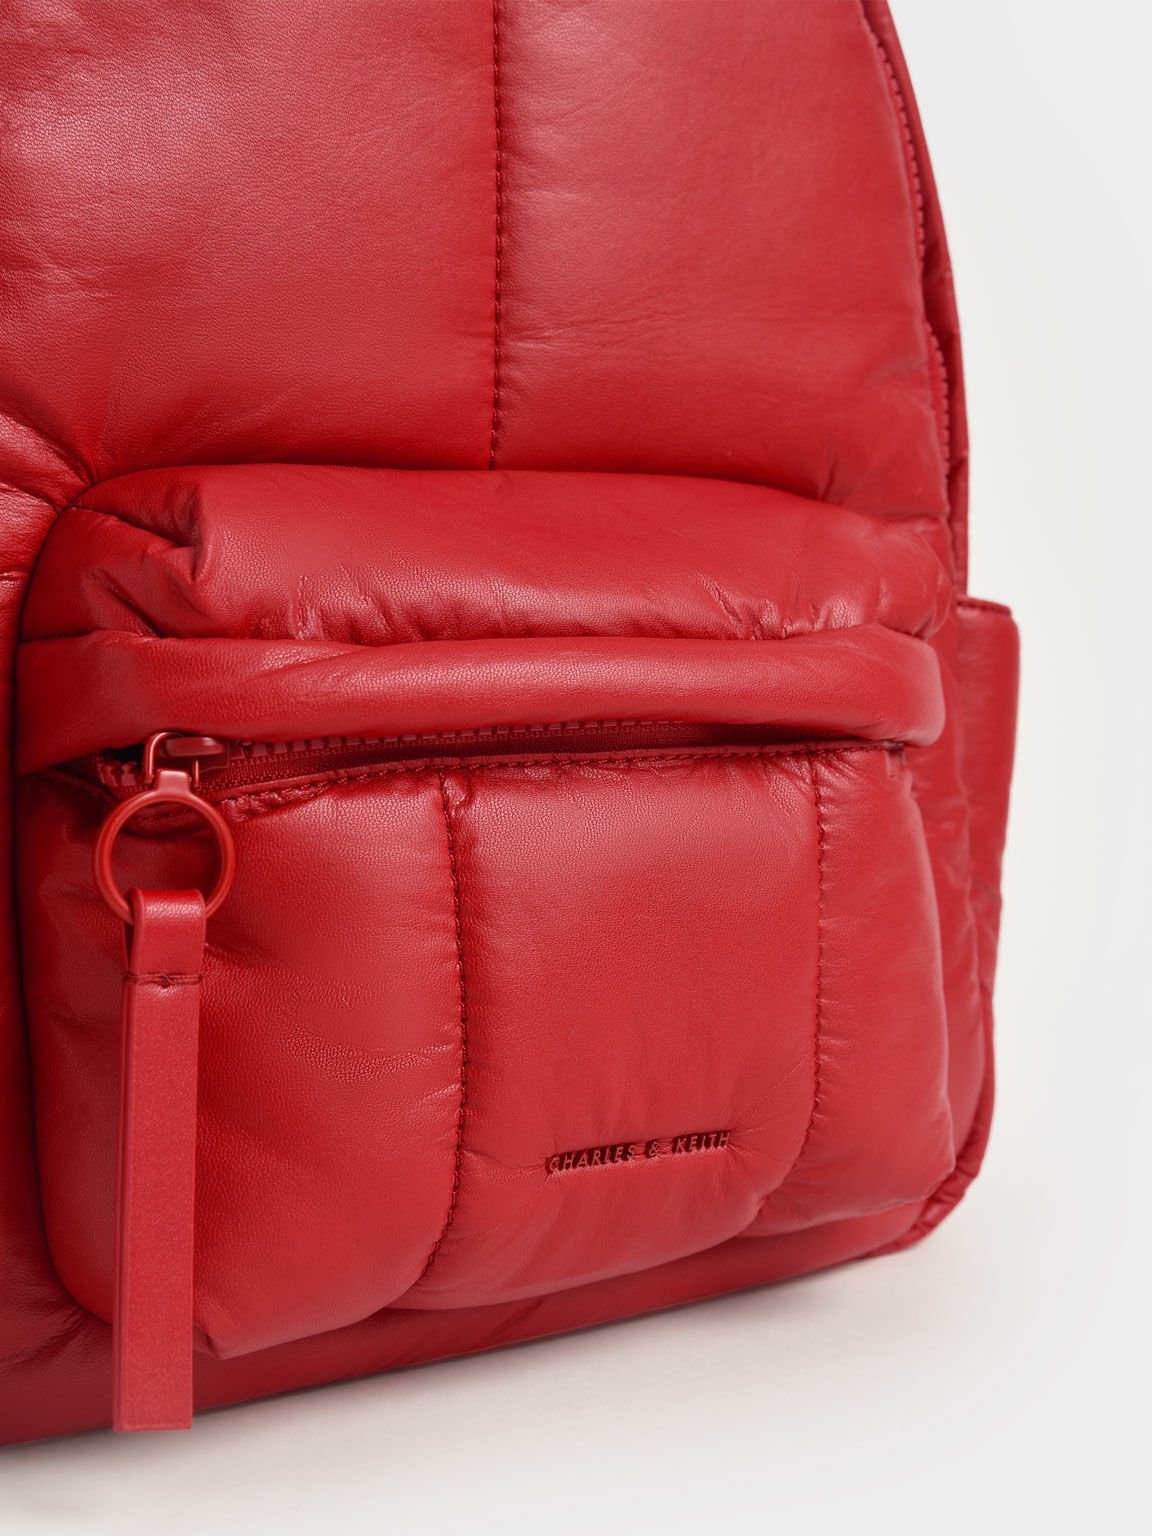 Lin Large Puffy Backpack, Red, hi-res